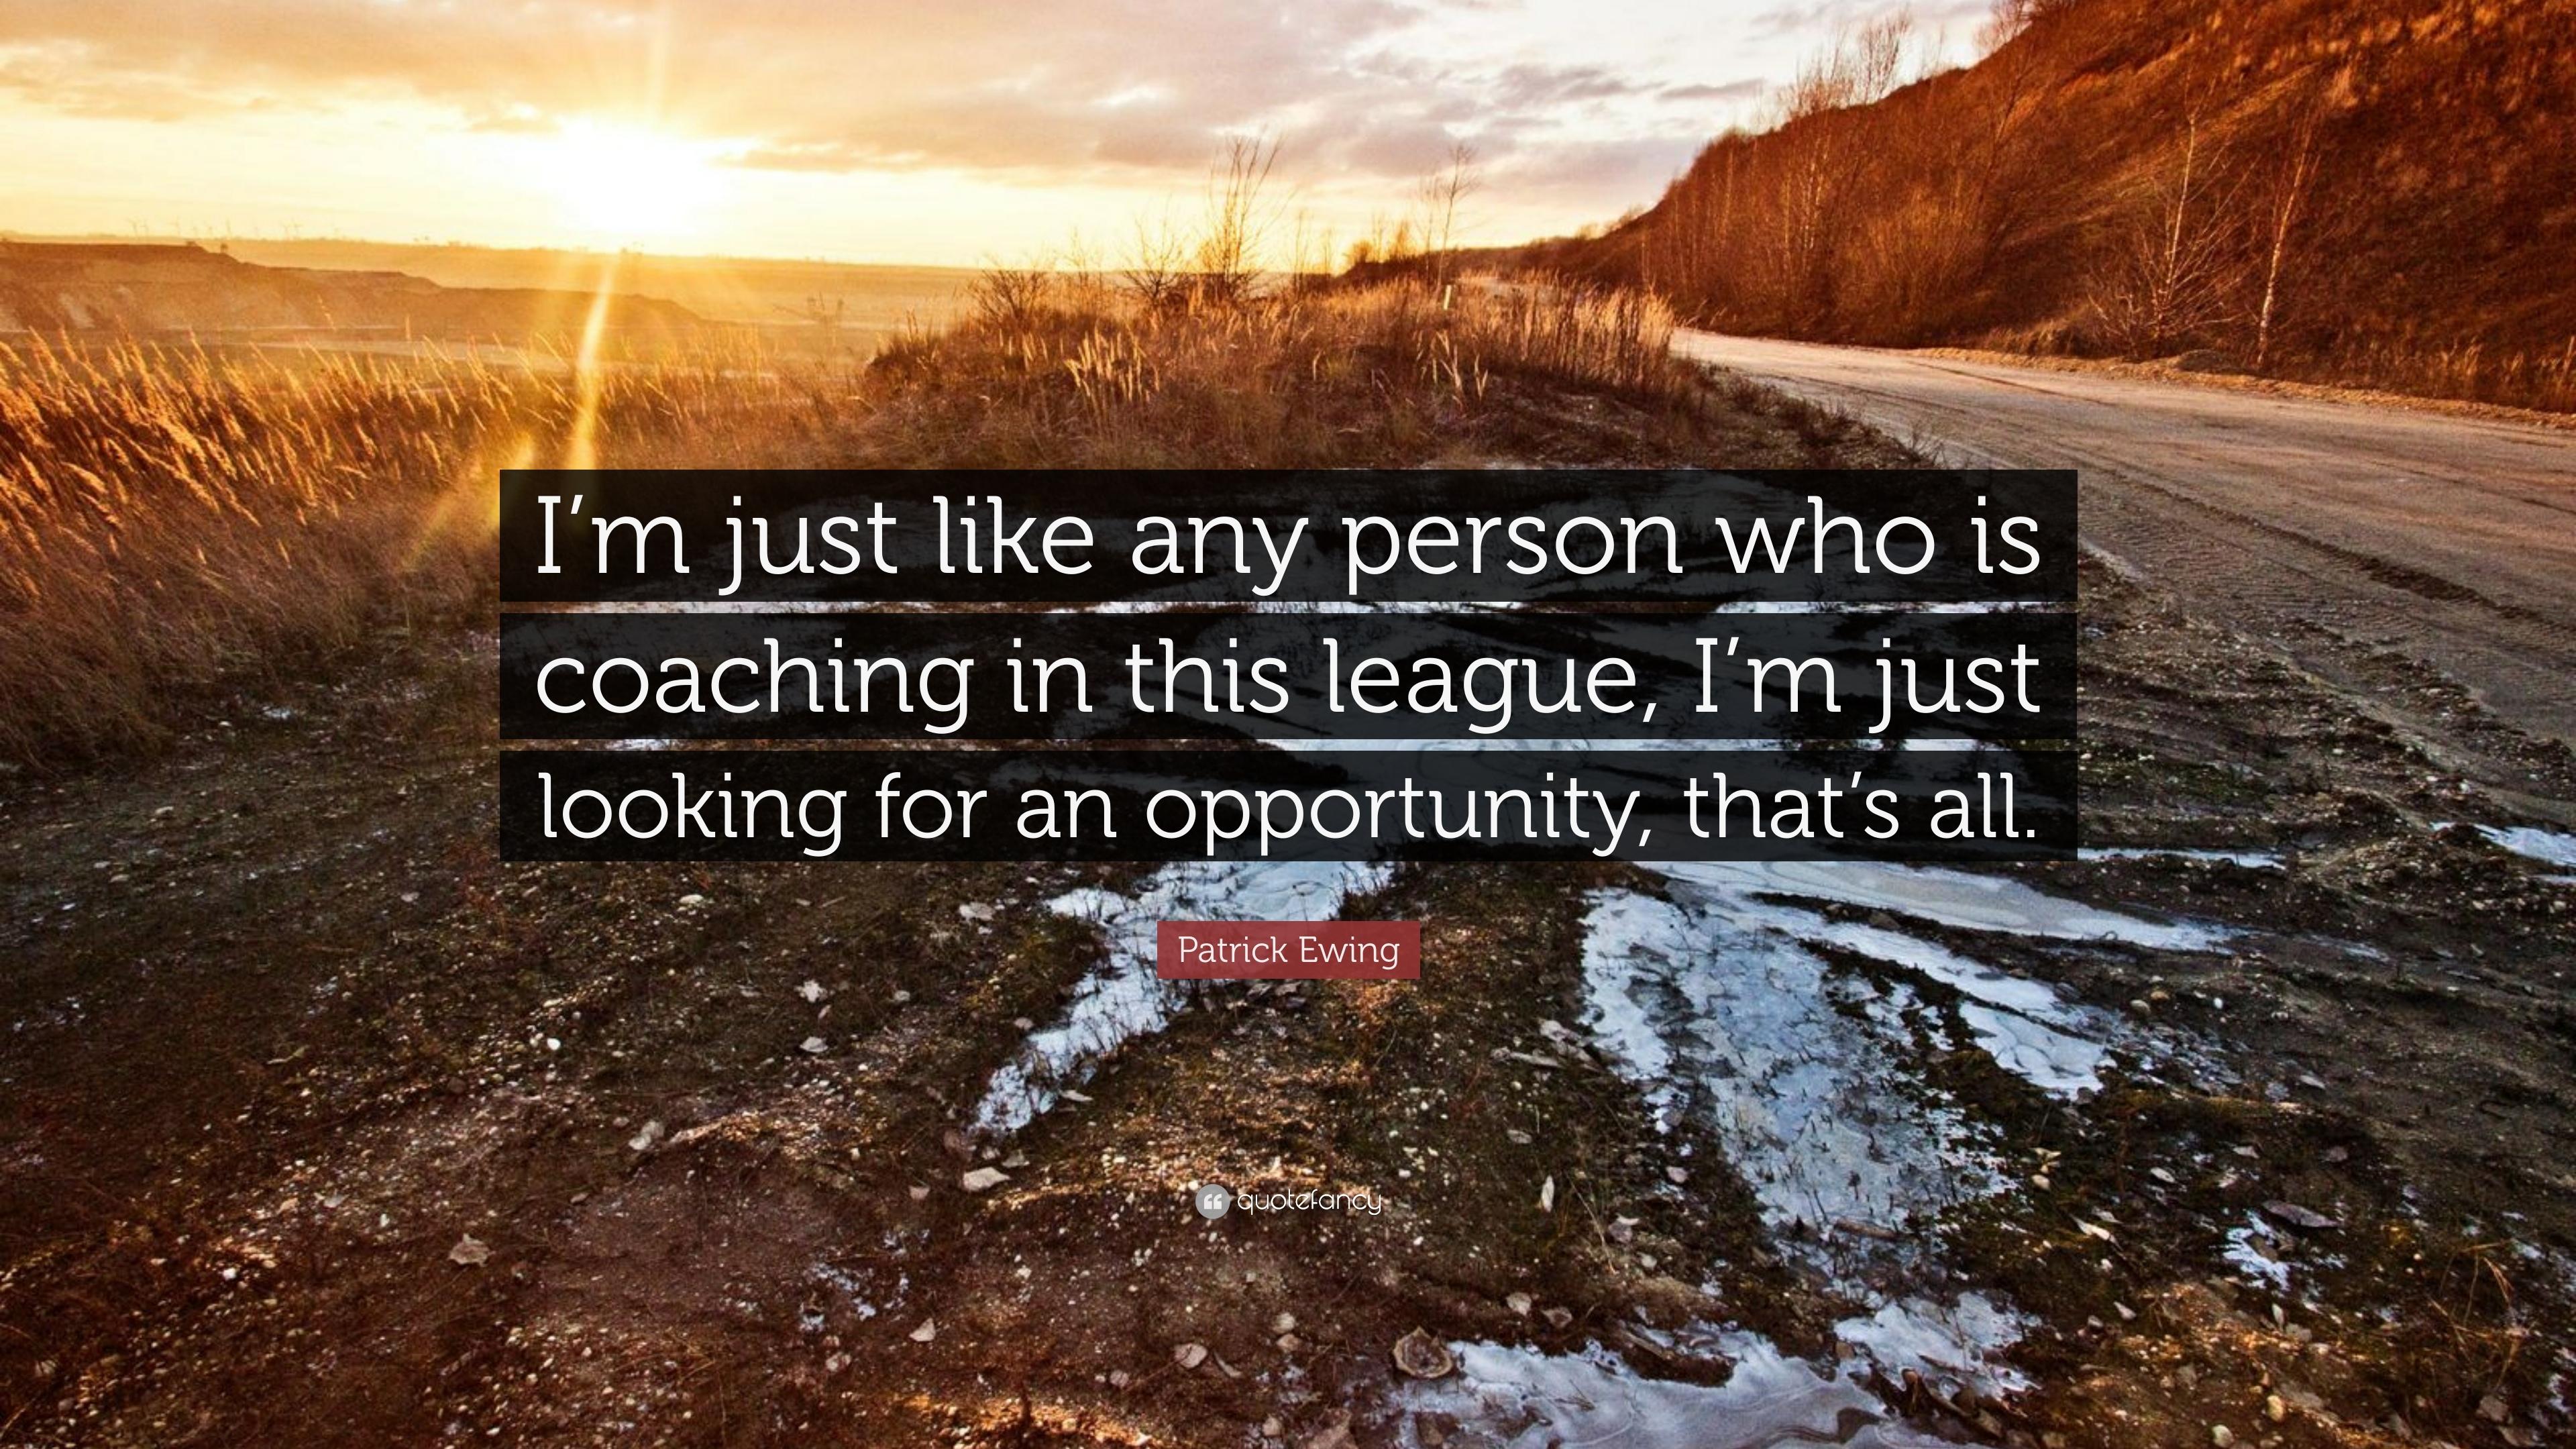 Patrick Ewing Quote: “I'm just like any person who is coaching